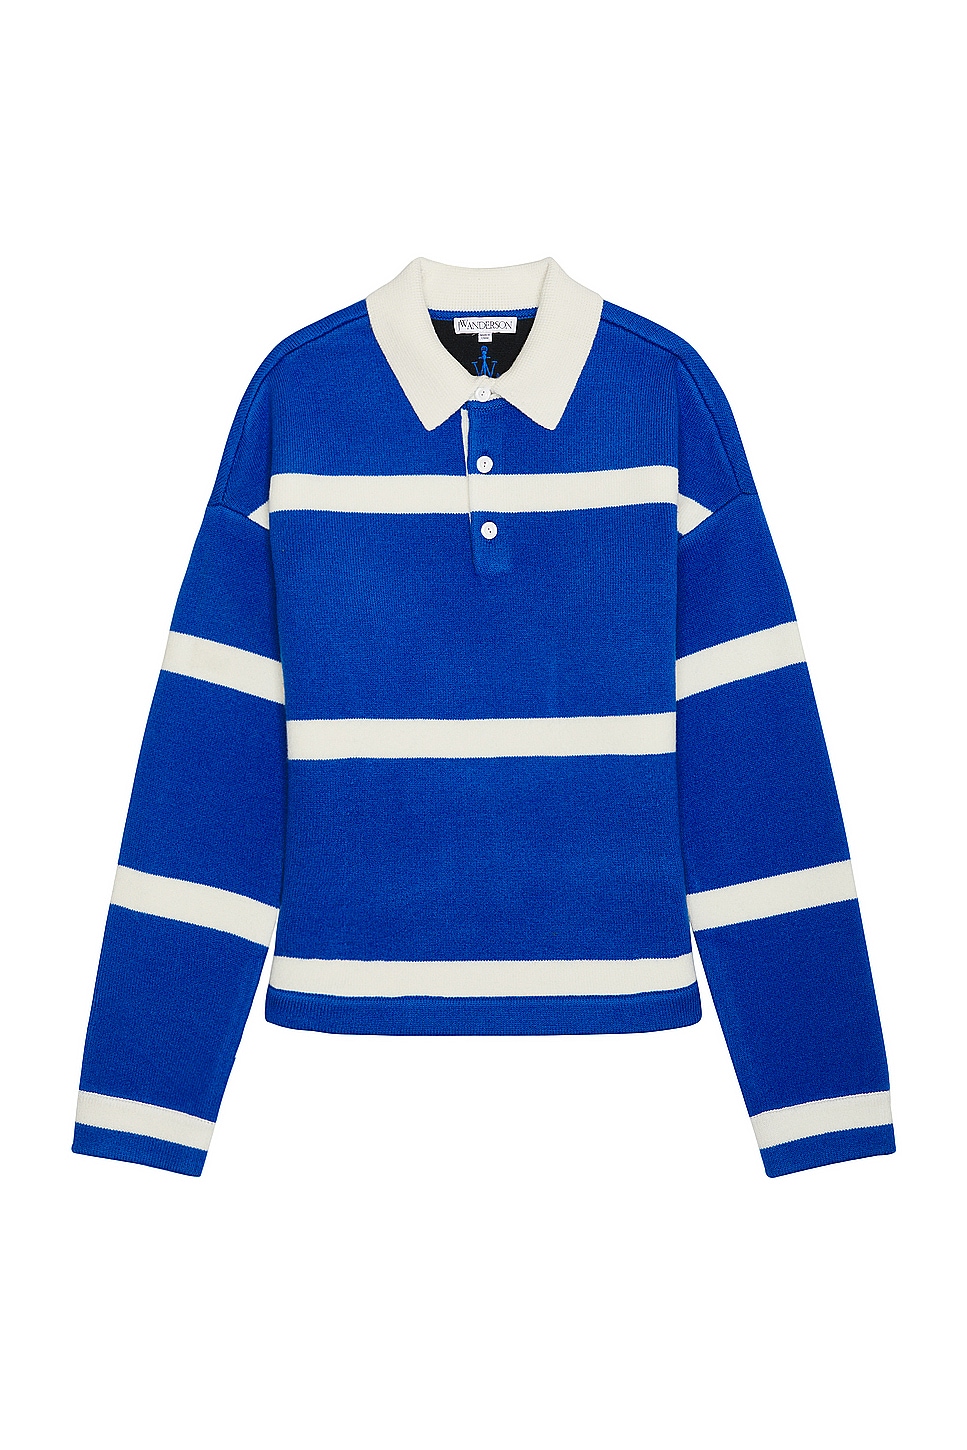 Image 1 of JW Anderson Structured Polo Top in Azure Blue